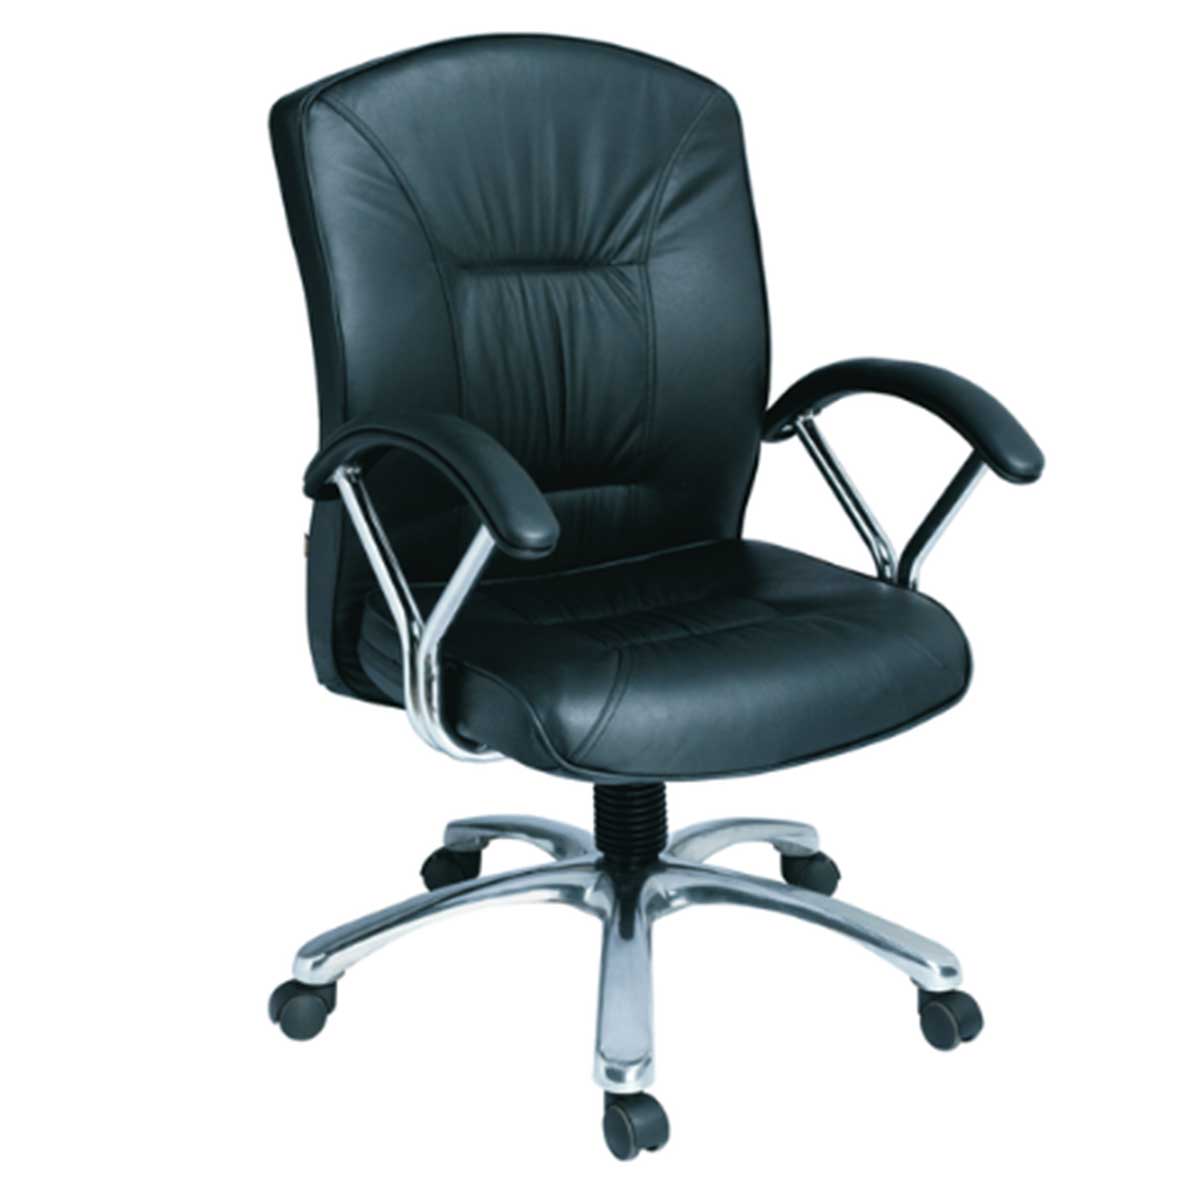 Executive Chair Manufacturers, Suppliers in Honda Chowk